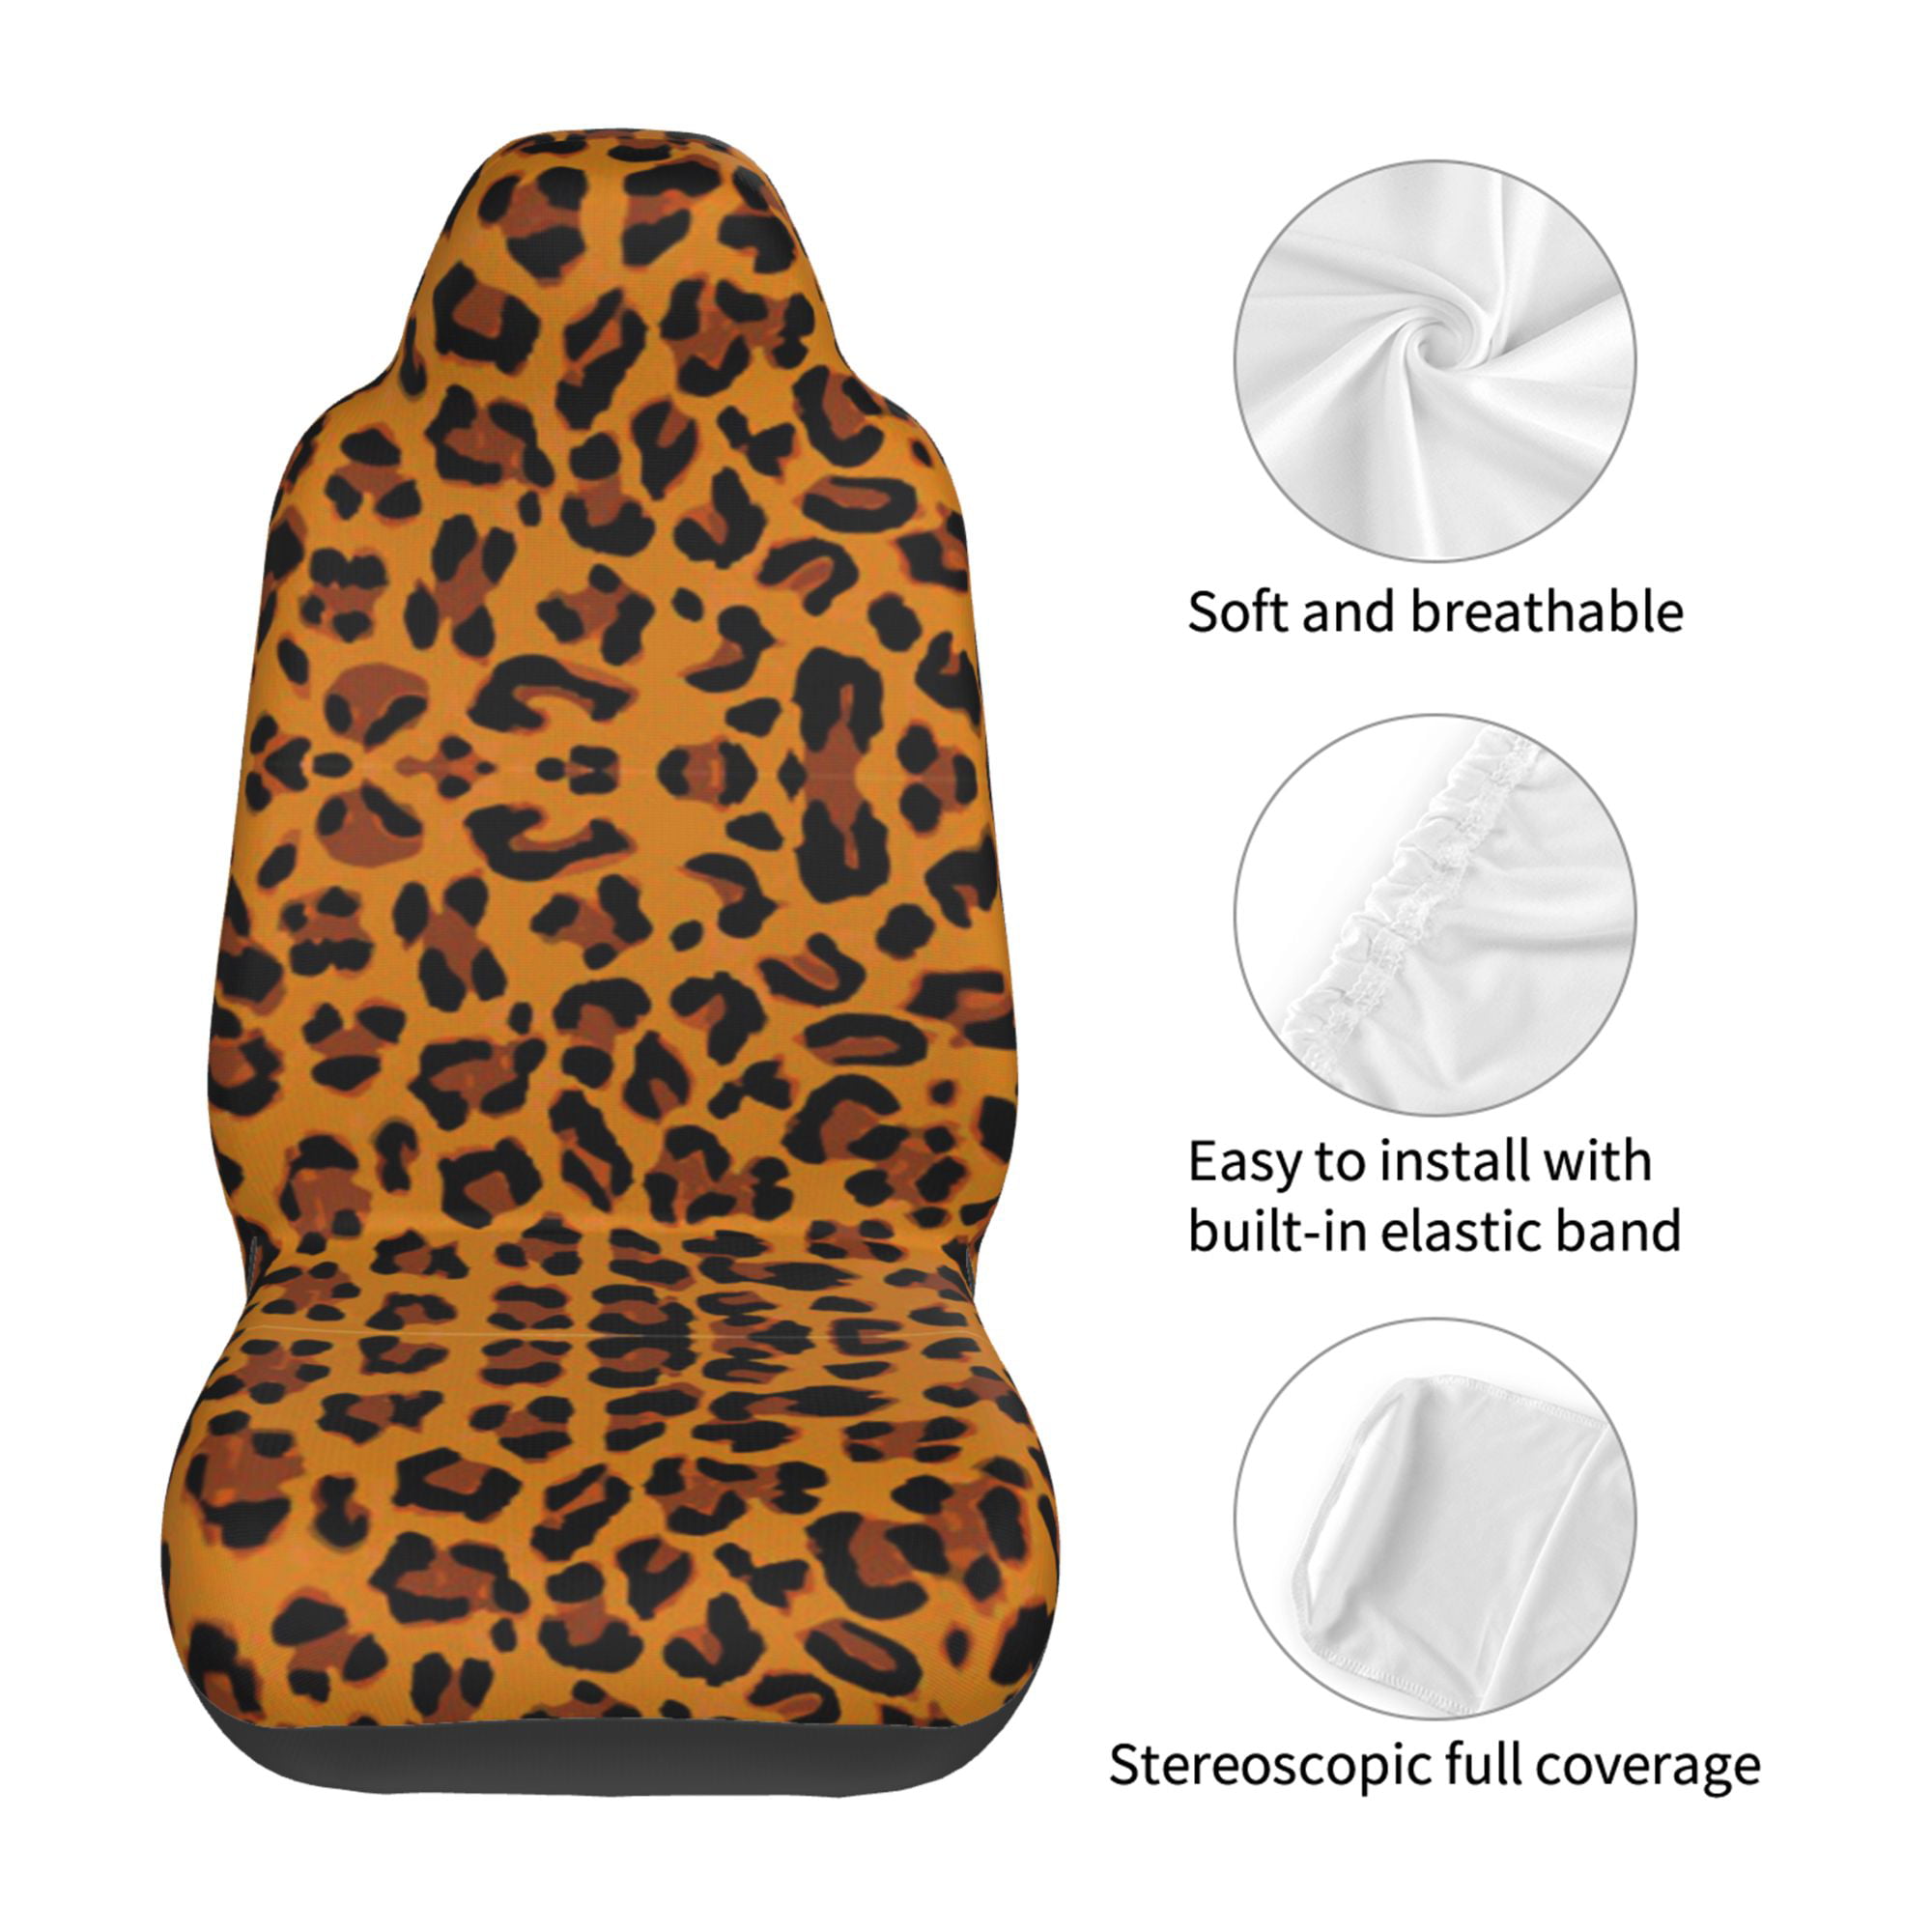 Green Cheetah Print Car Seat Covers Custom Car Accessories Gifts Idea,Pack  of 2 Universal Front Seat Protective Cover - AliExpress